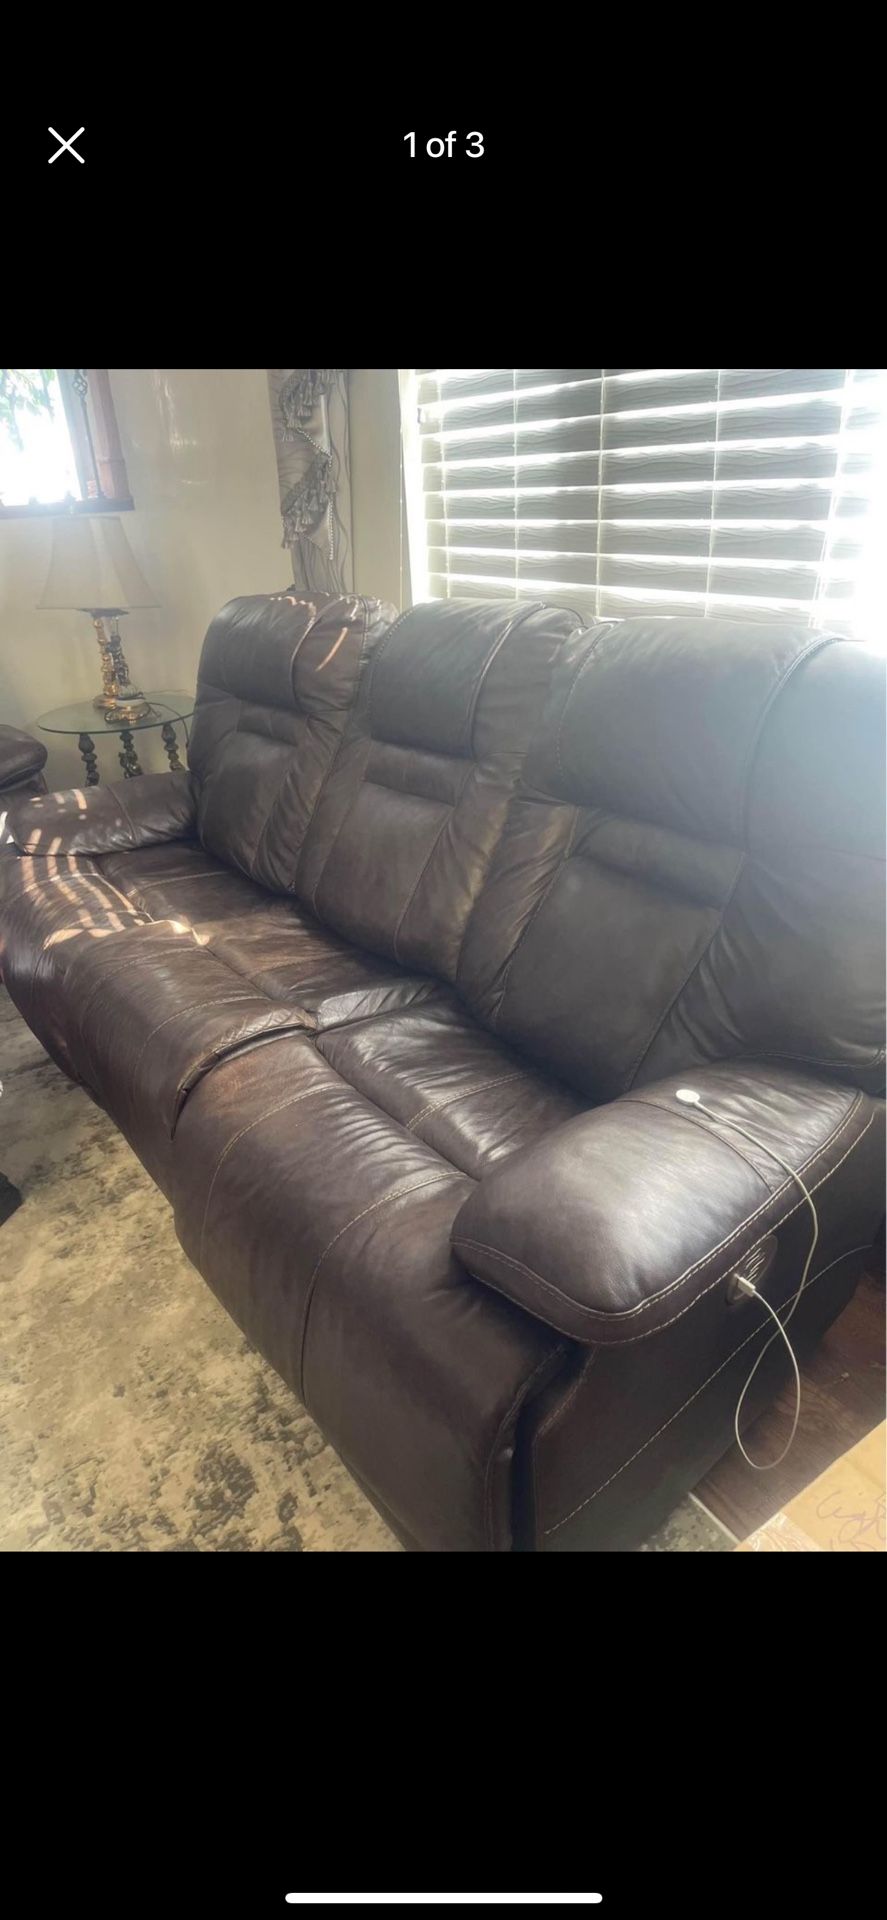 Nice real Leather American furniture reclining sofa on sale